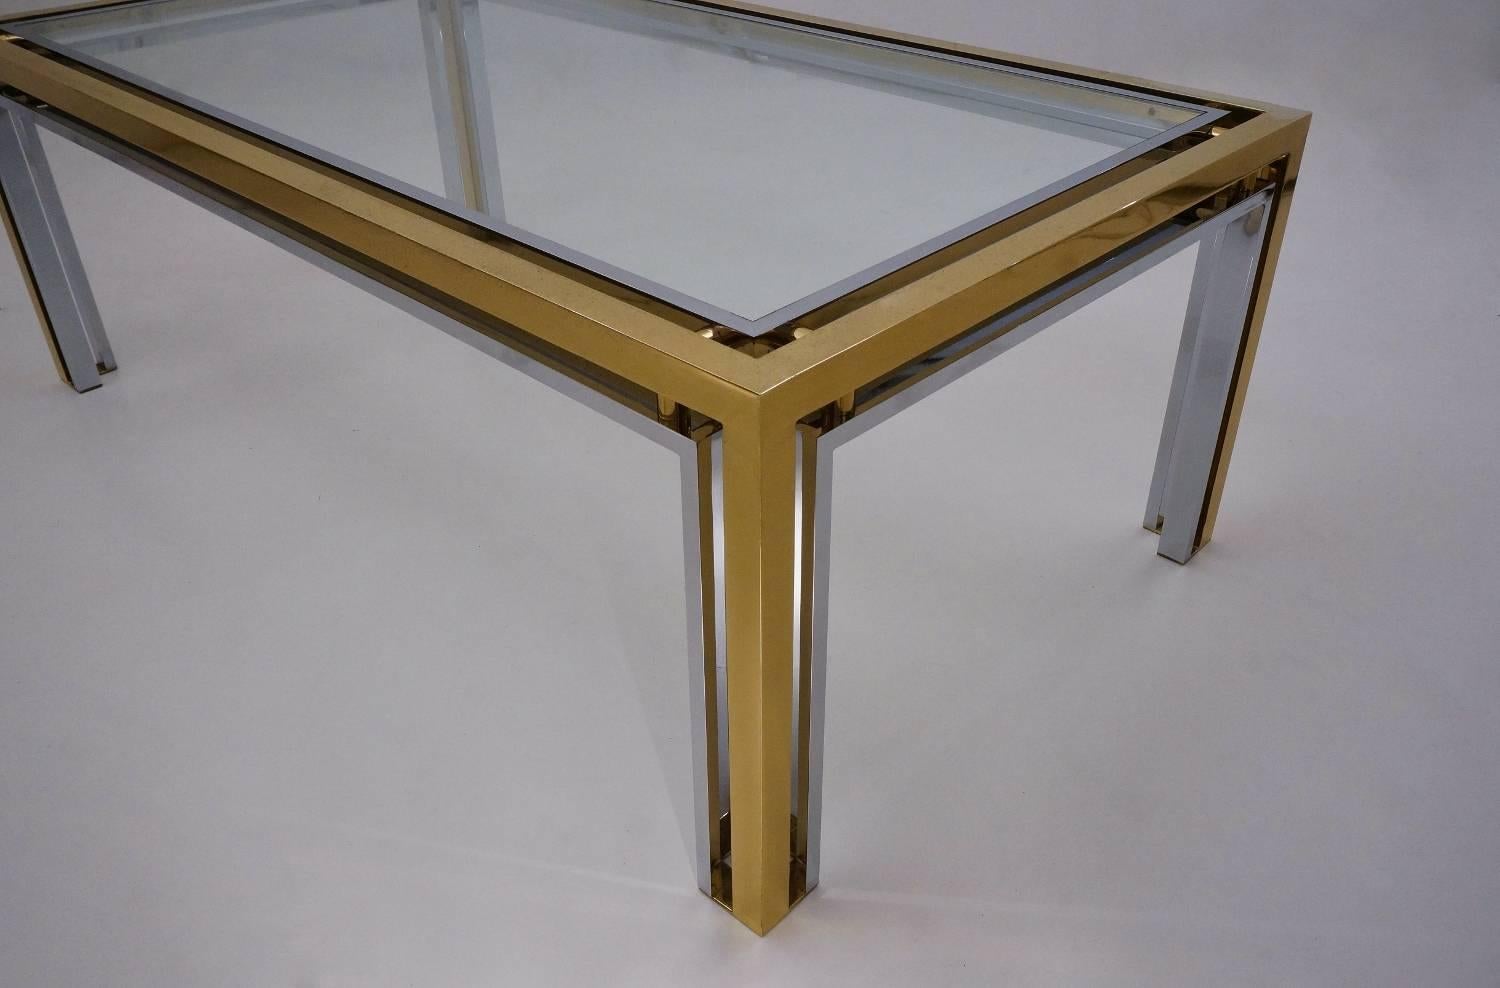 Romeo Rega brass coffee table with chrome detailing, 1970`s Italian.

This coffee table has been gently cleaned respecting the vintage patina; it is ready to use.

With the mixed metals & geometric patterns this table is characteristic of the